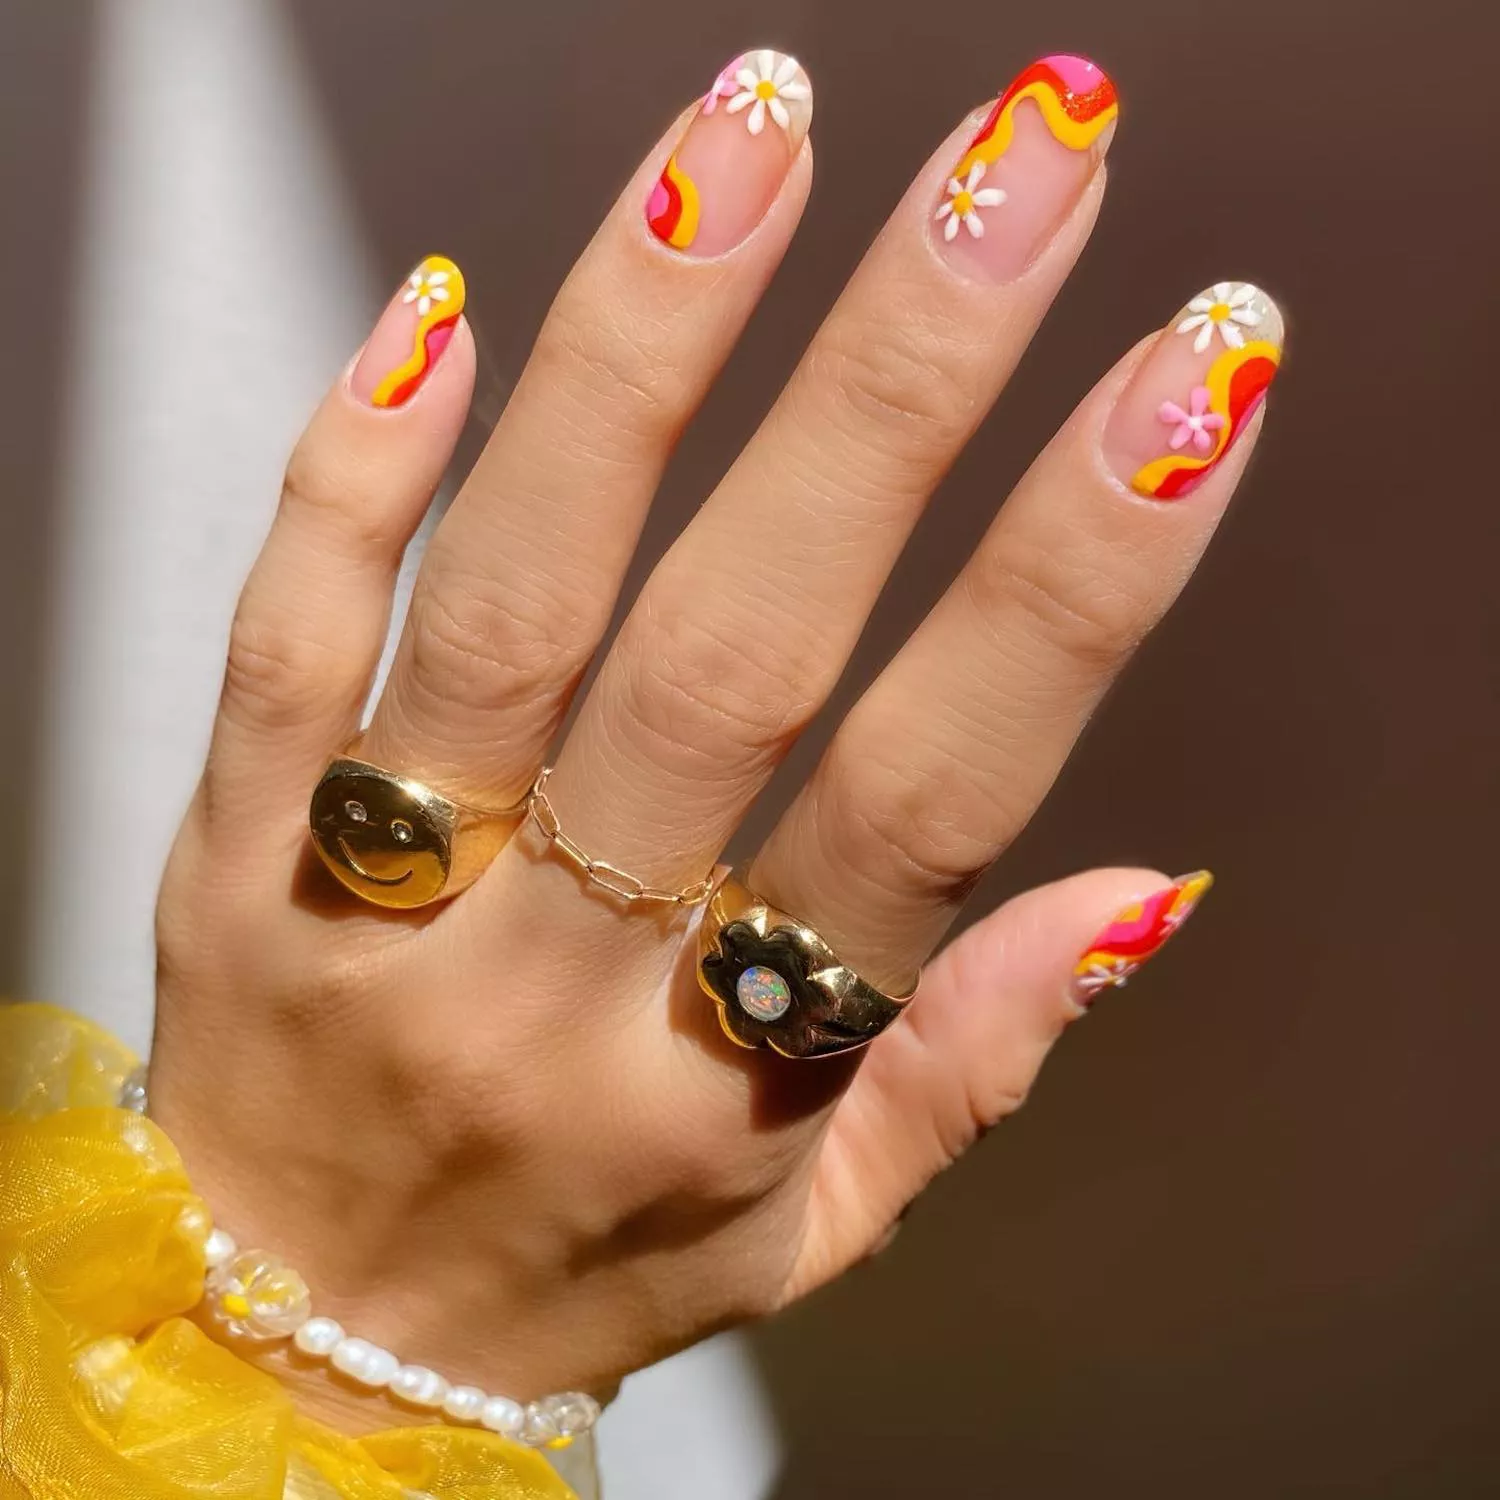 Manicure with pink, red, and yellow wavy design and pink and white daisies